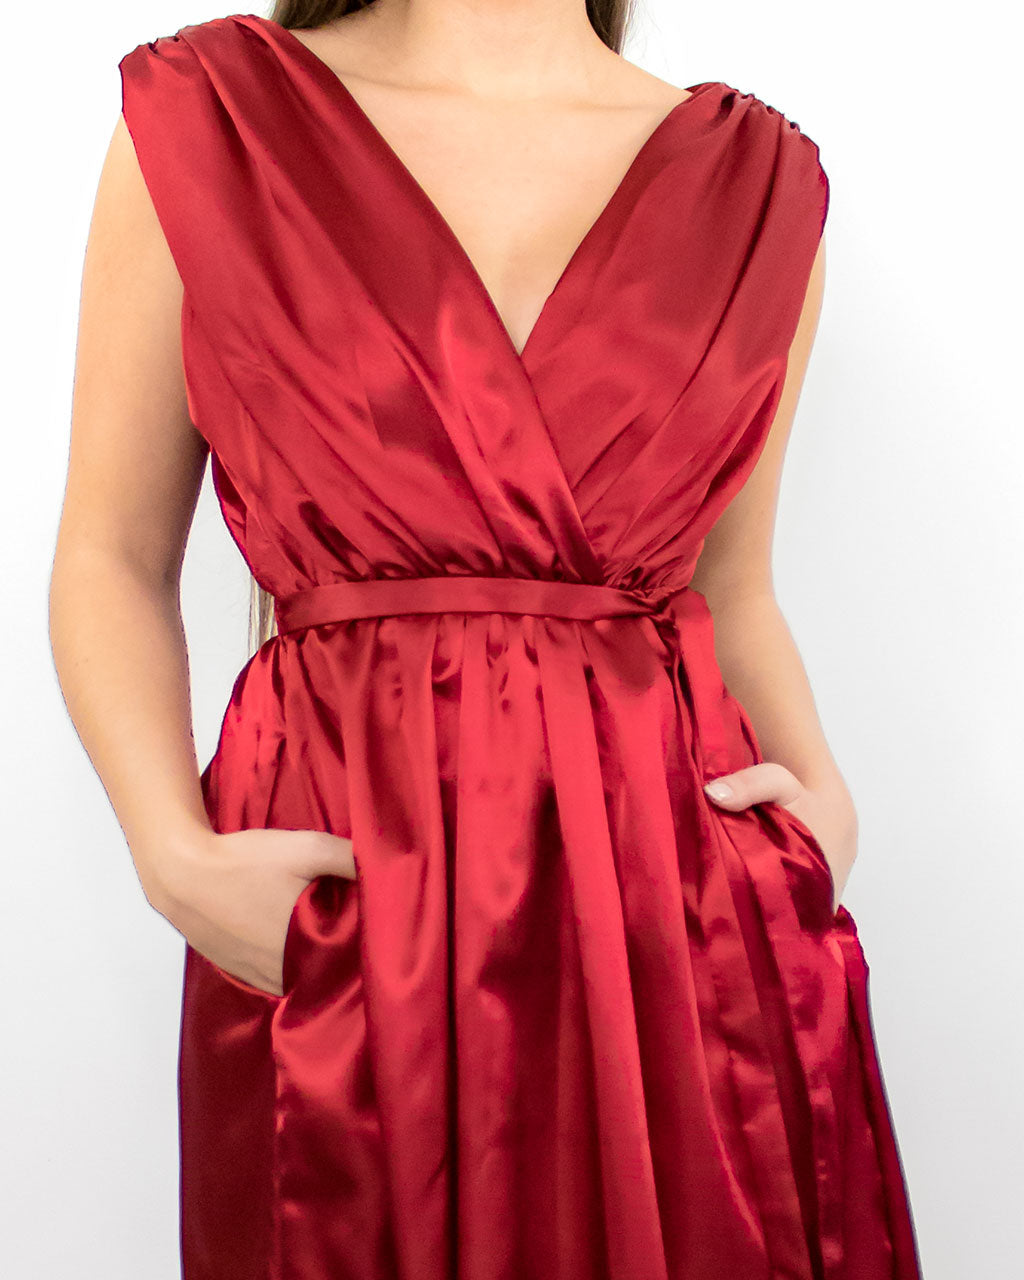 Ethical rust red midi occasion dress by ADKN sustainable satin silk formal party dresses for prom wedding guests made in UK